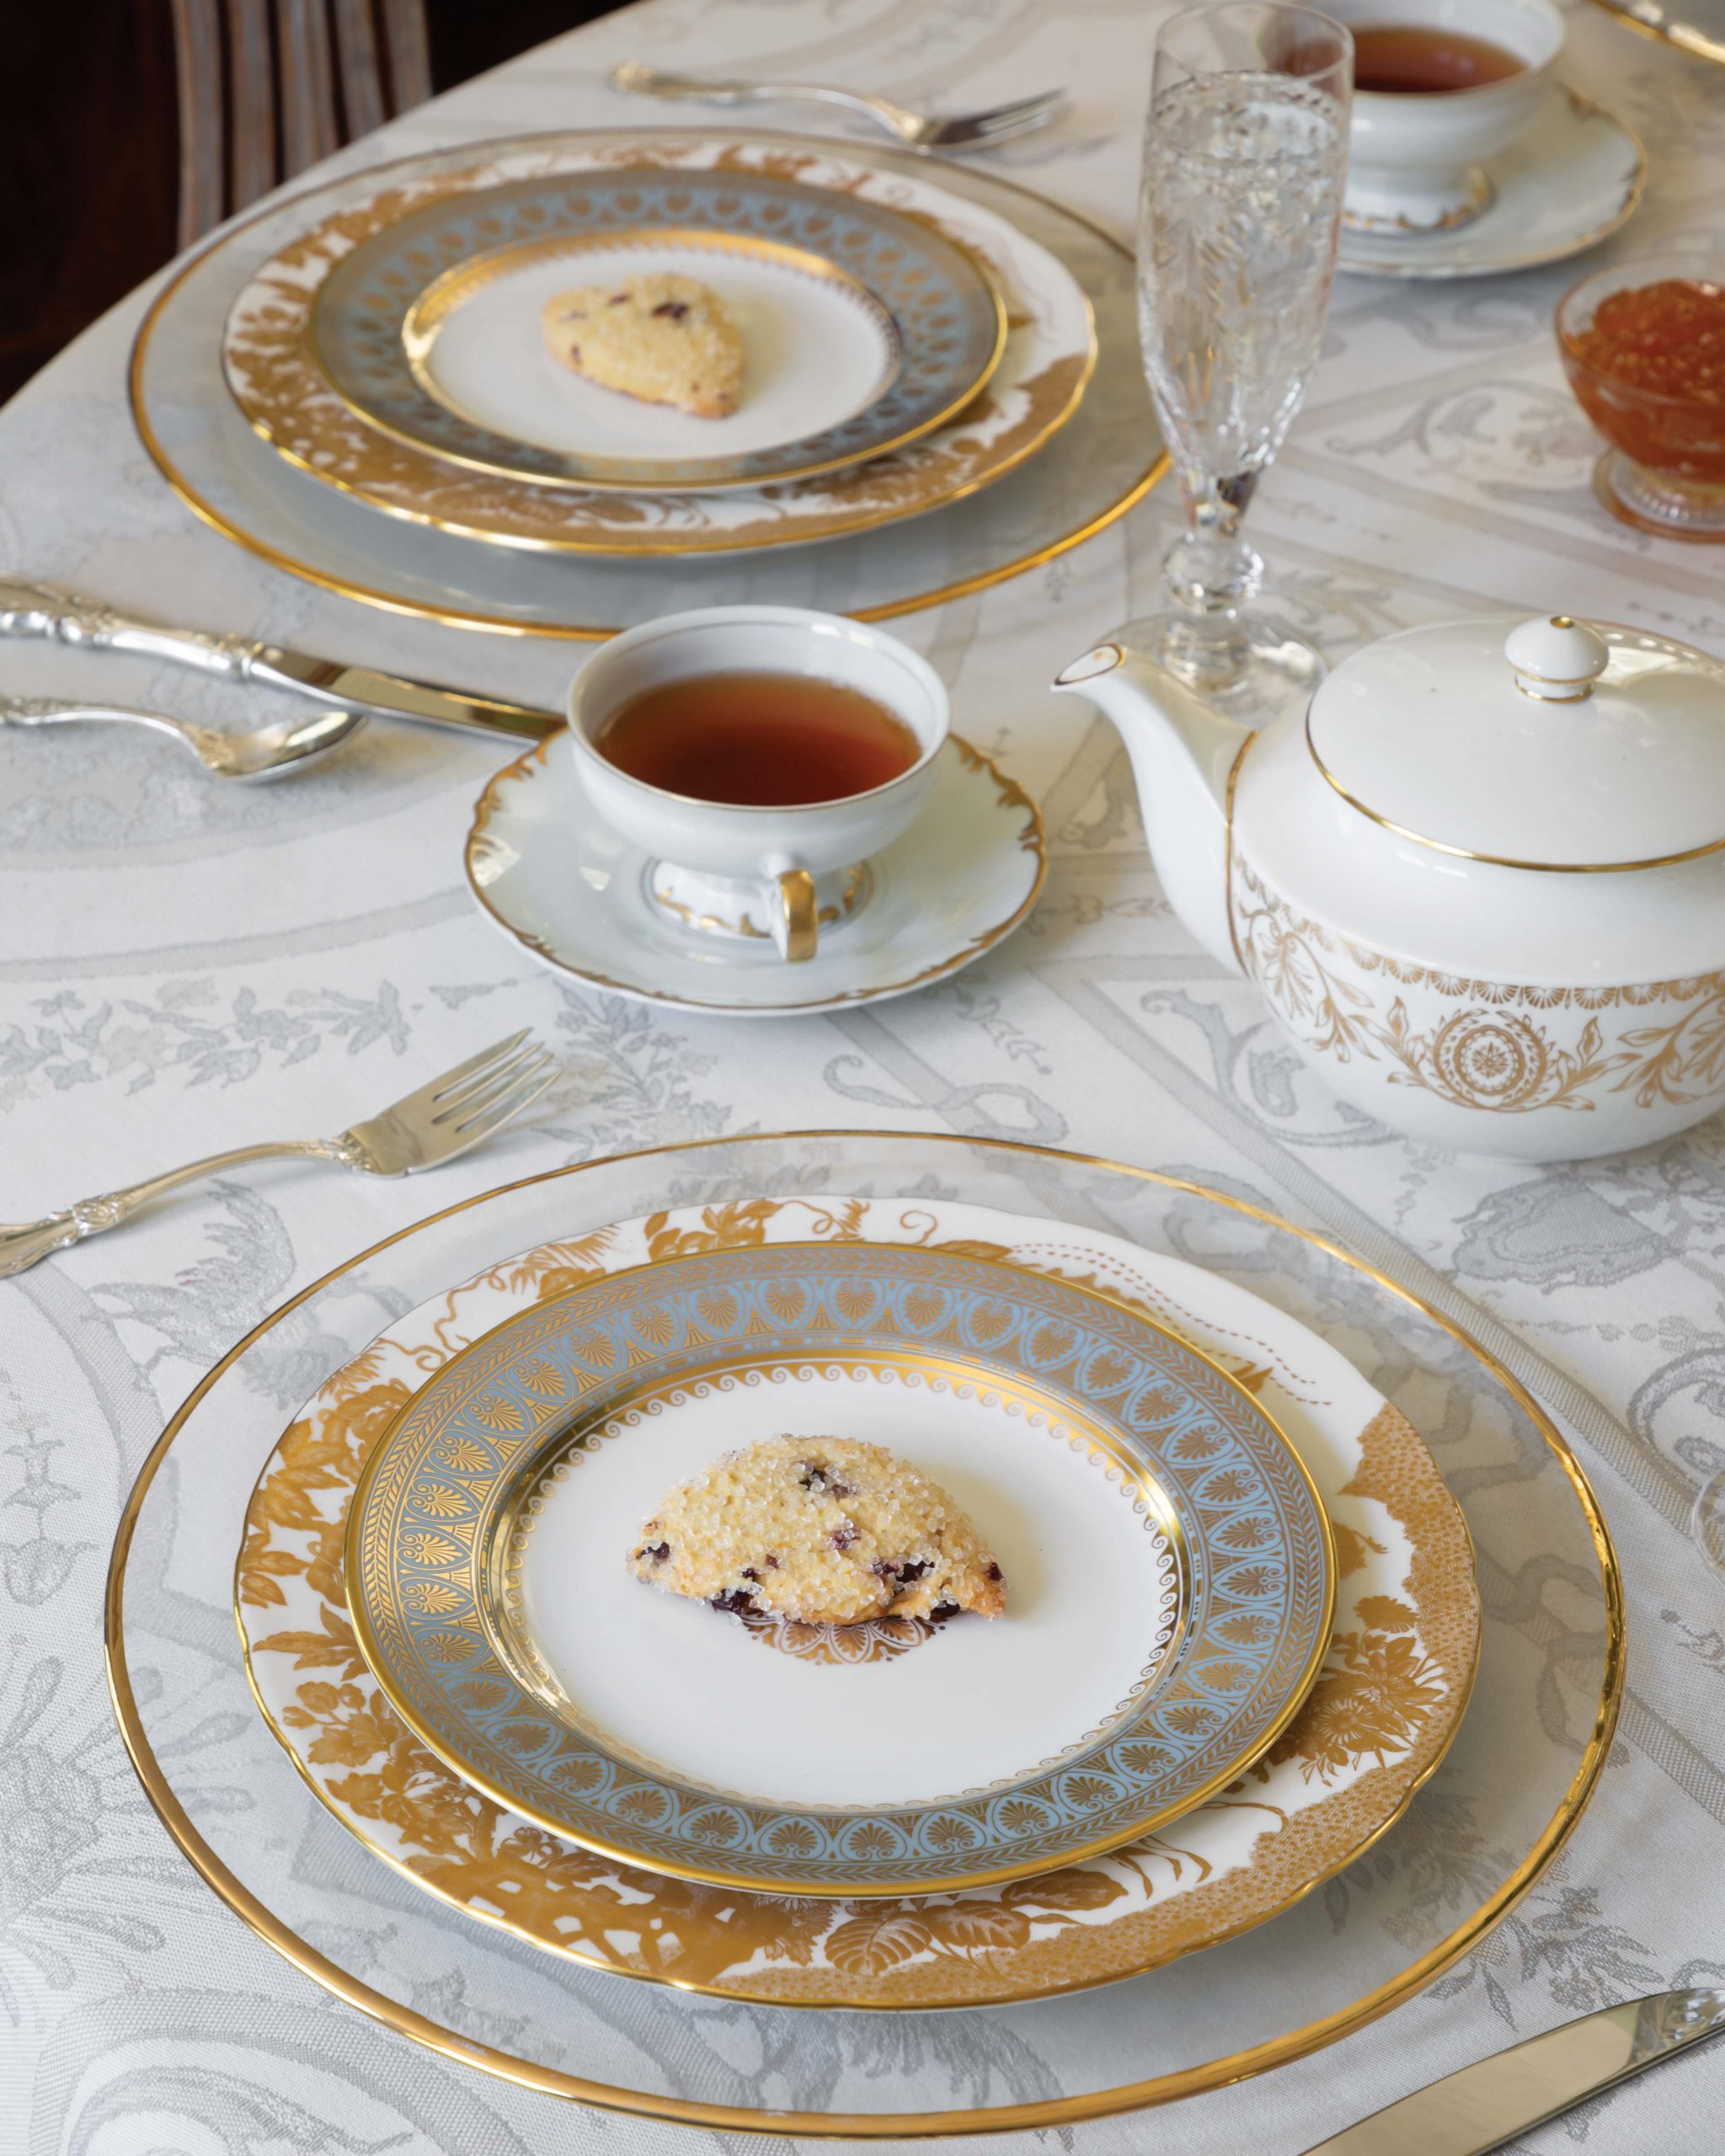 A table set for afternoon tea features gold-and-white china and a sweet scone ready for tasting.